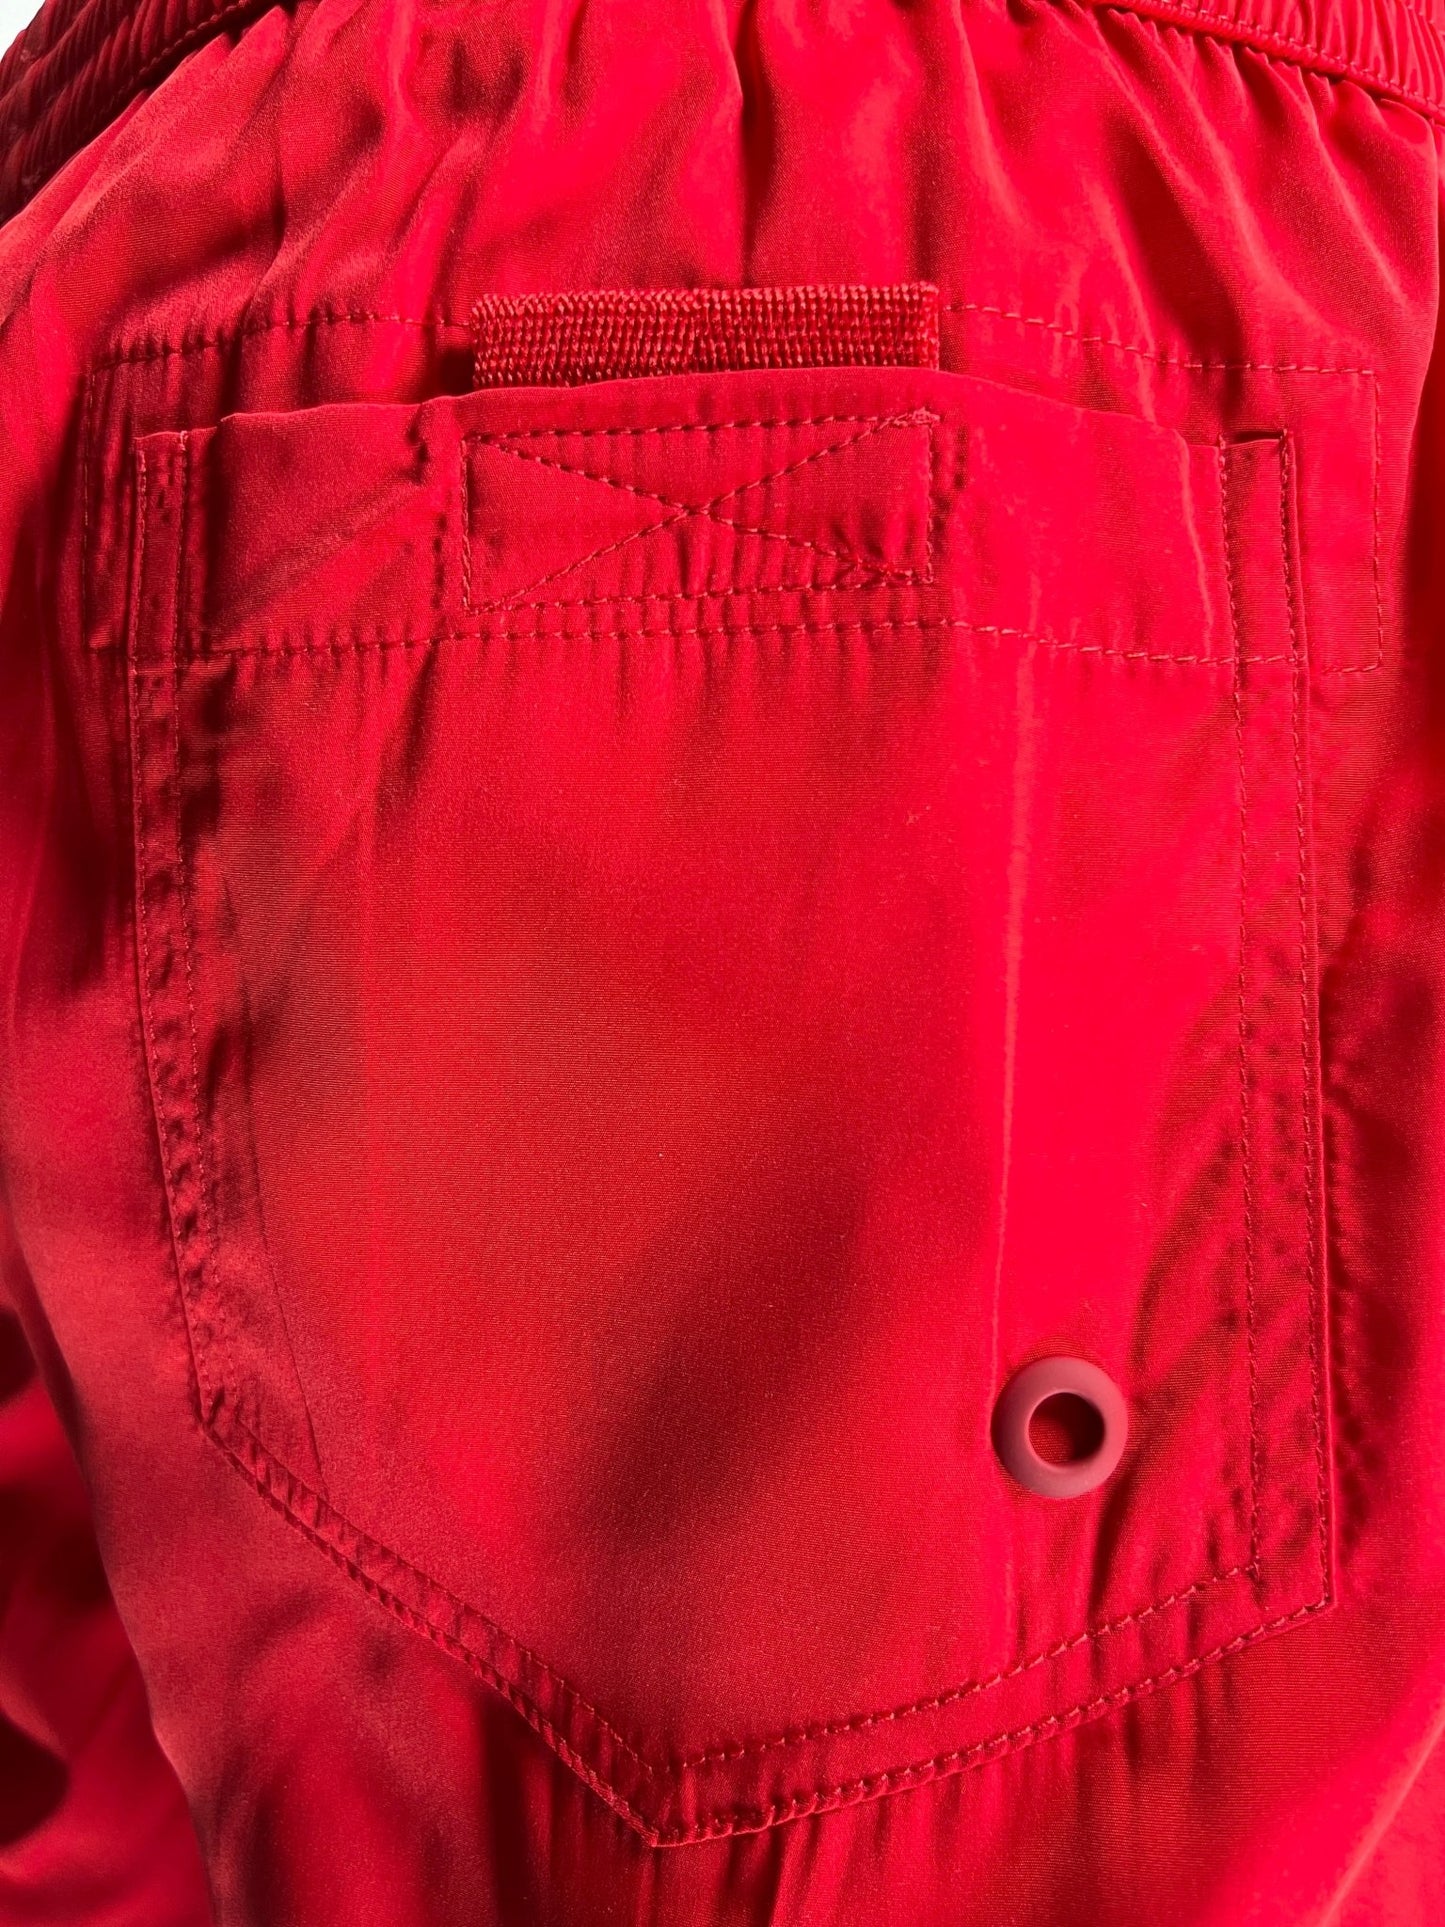 Close-up of a red fabric pocket with visible stitching and a buttonhole on Diesel BMBX-Mario-34 Short Red swimming shorts.